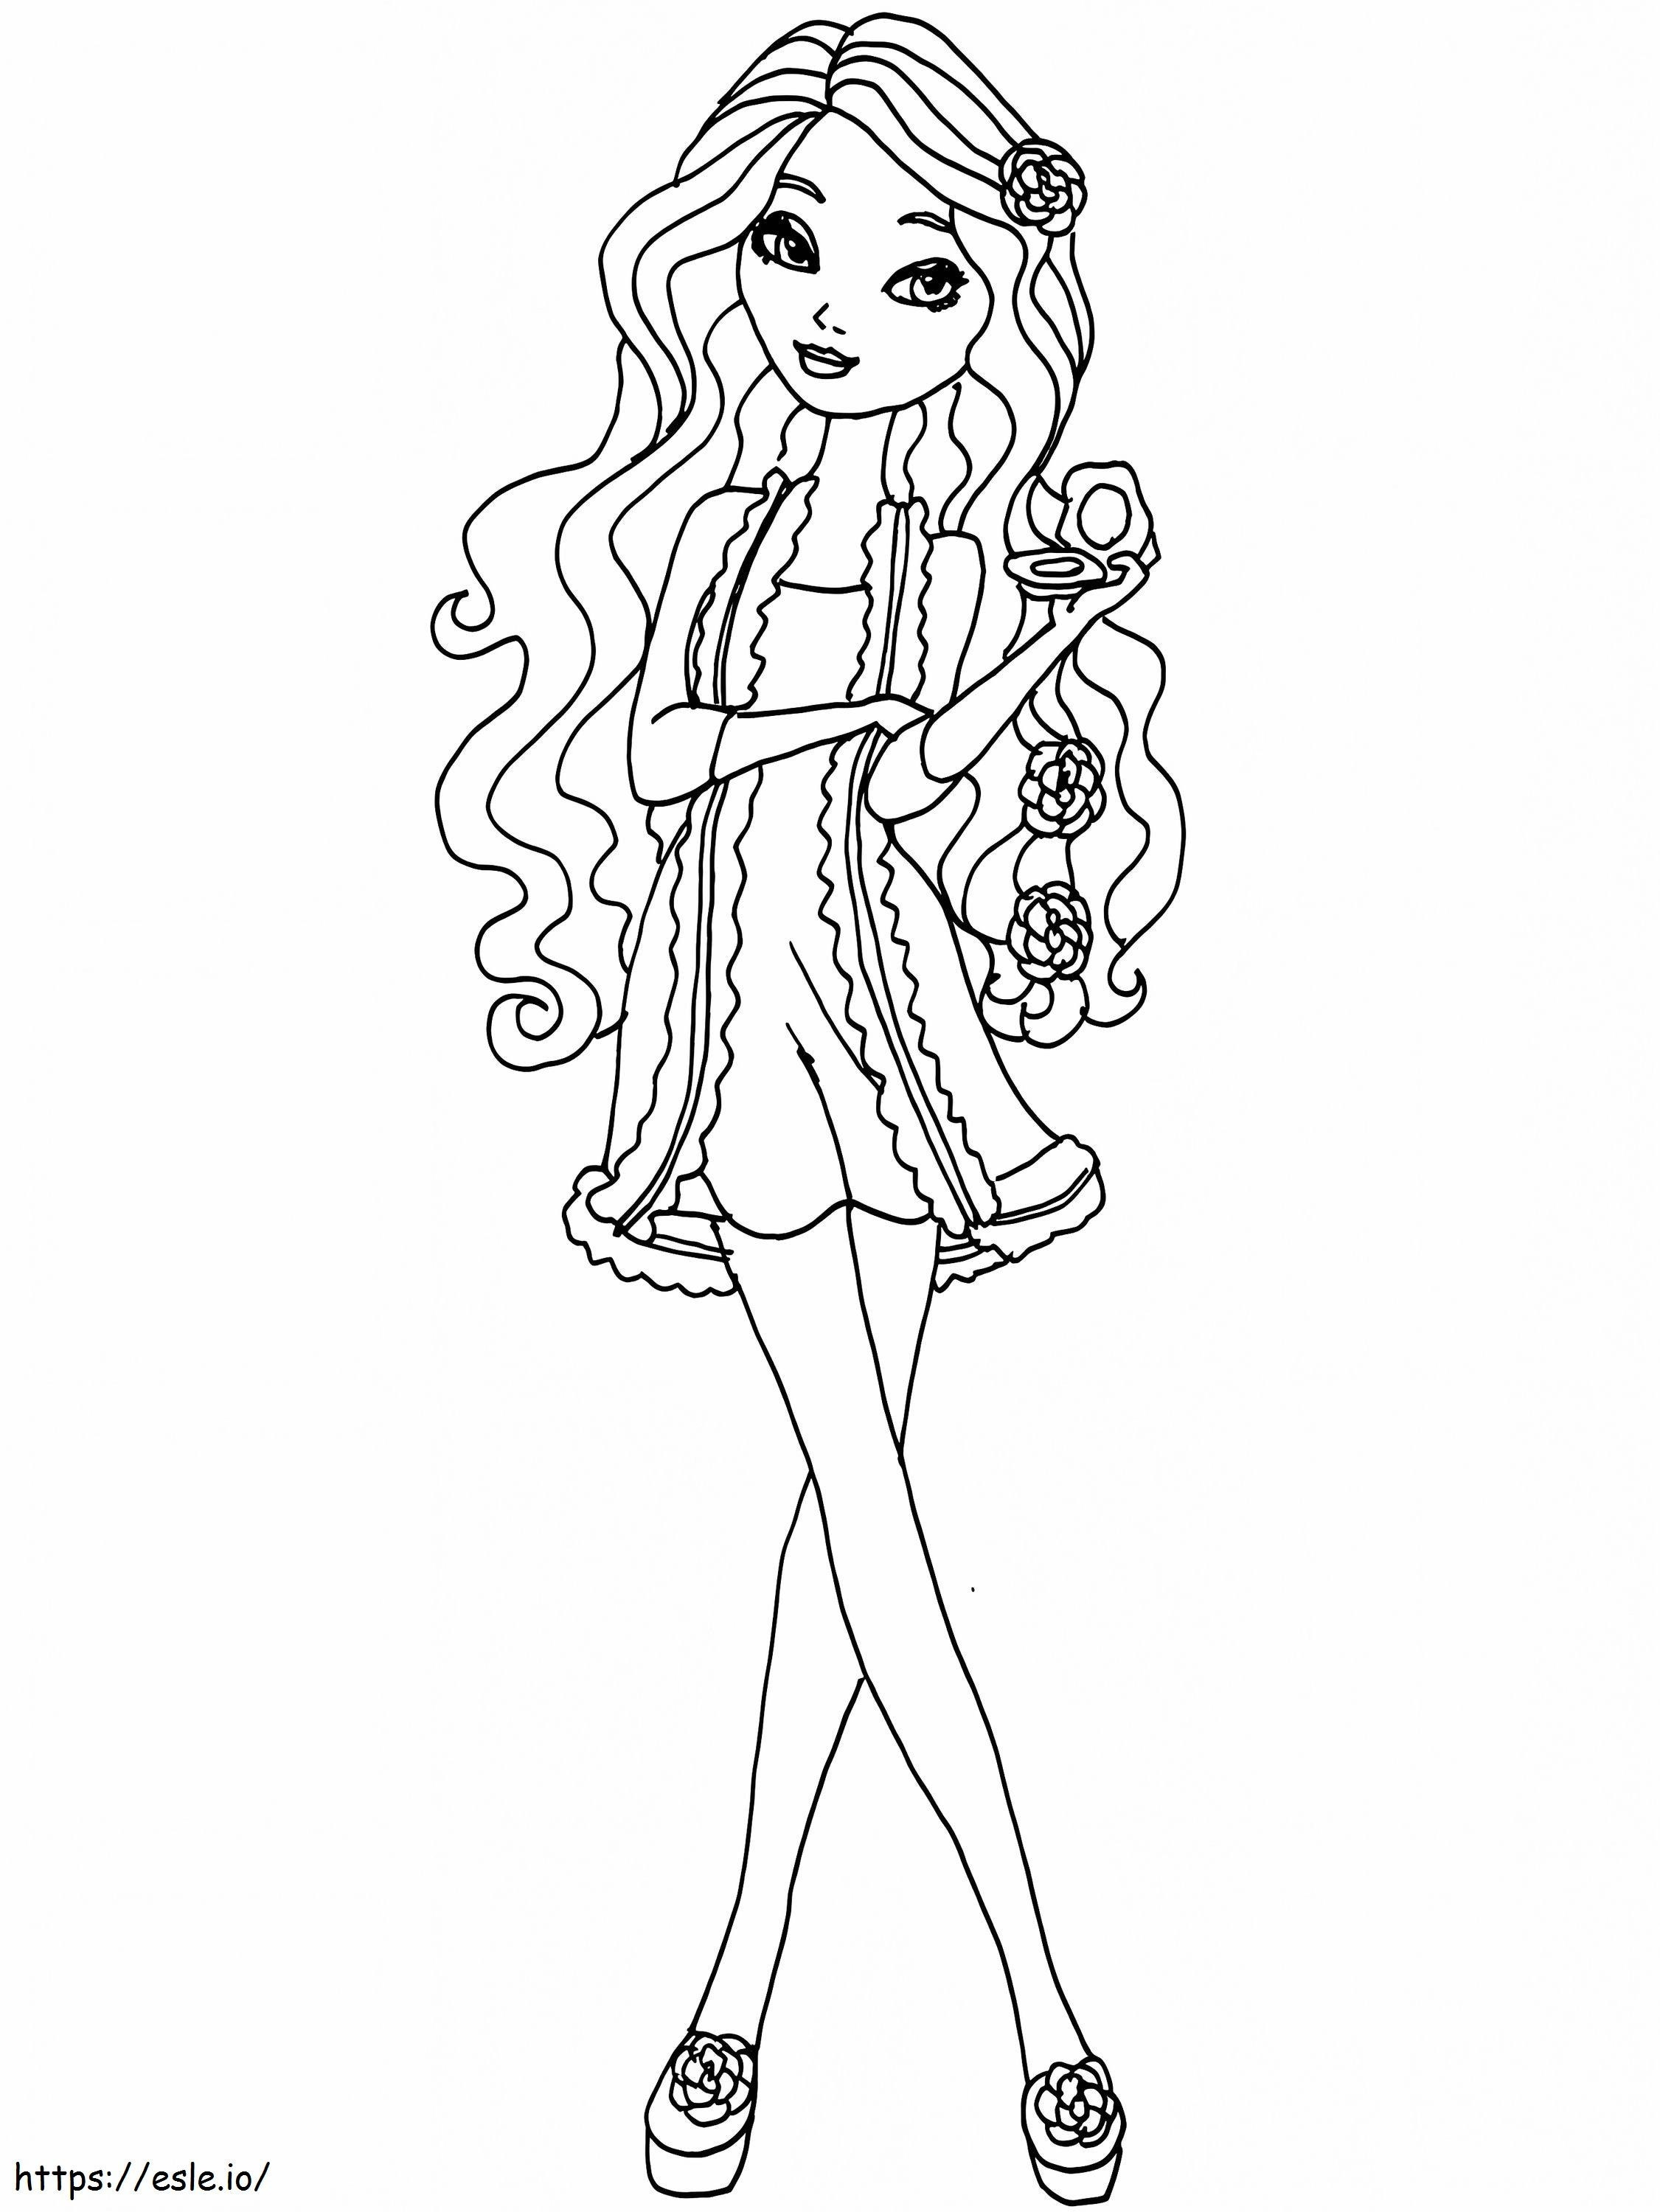 Ldhdbdr coloring page